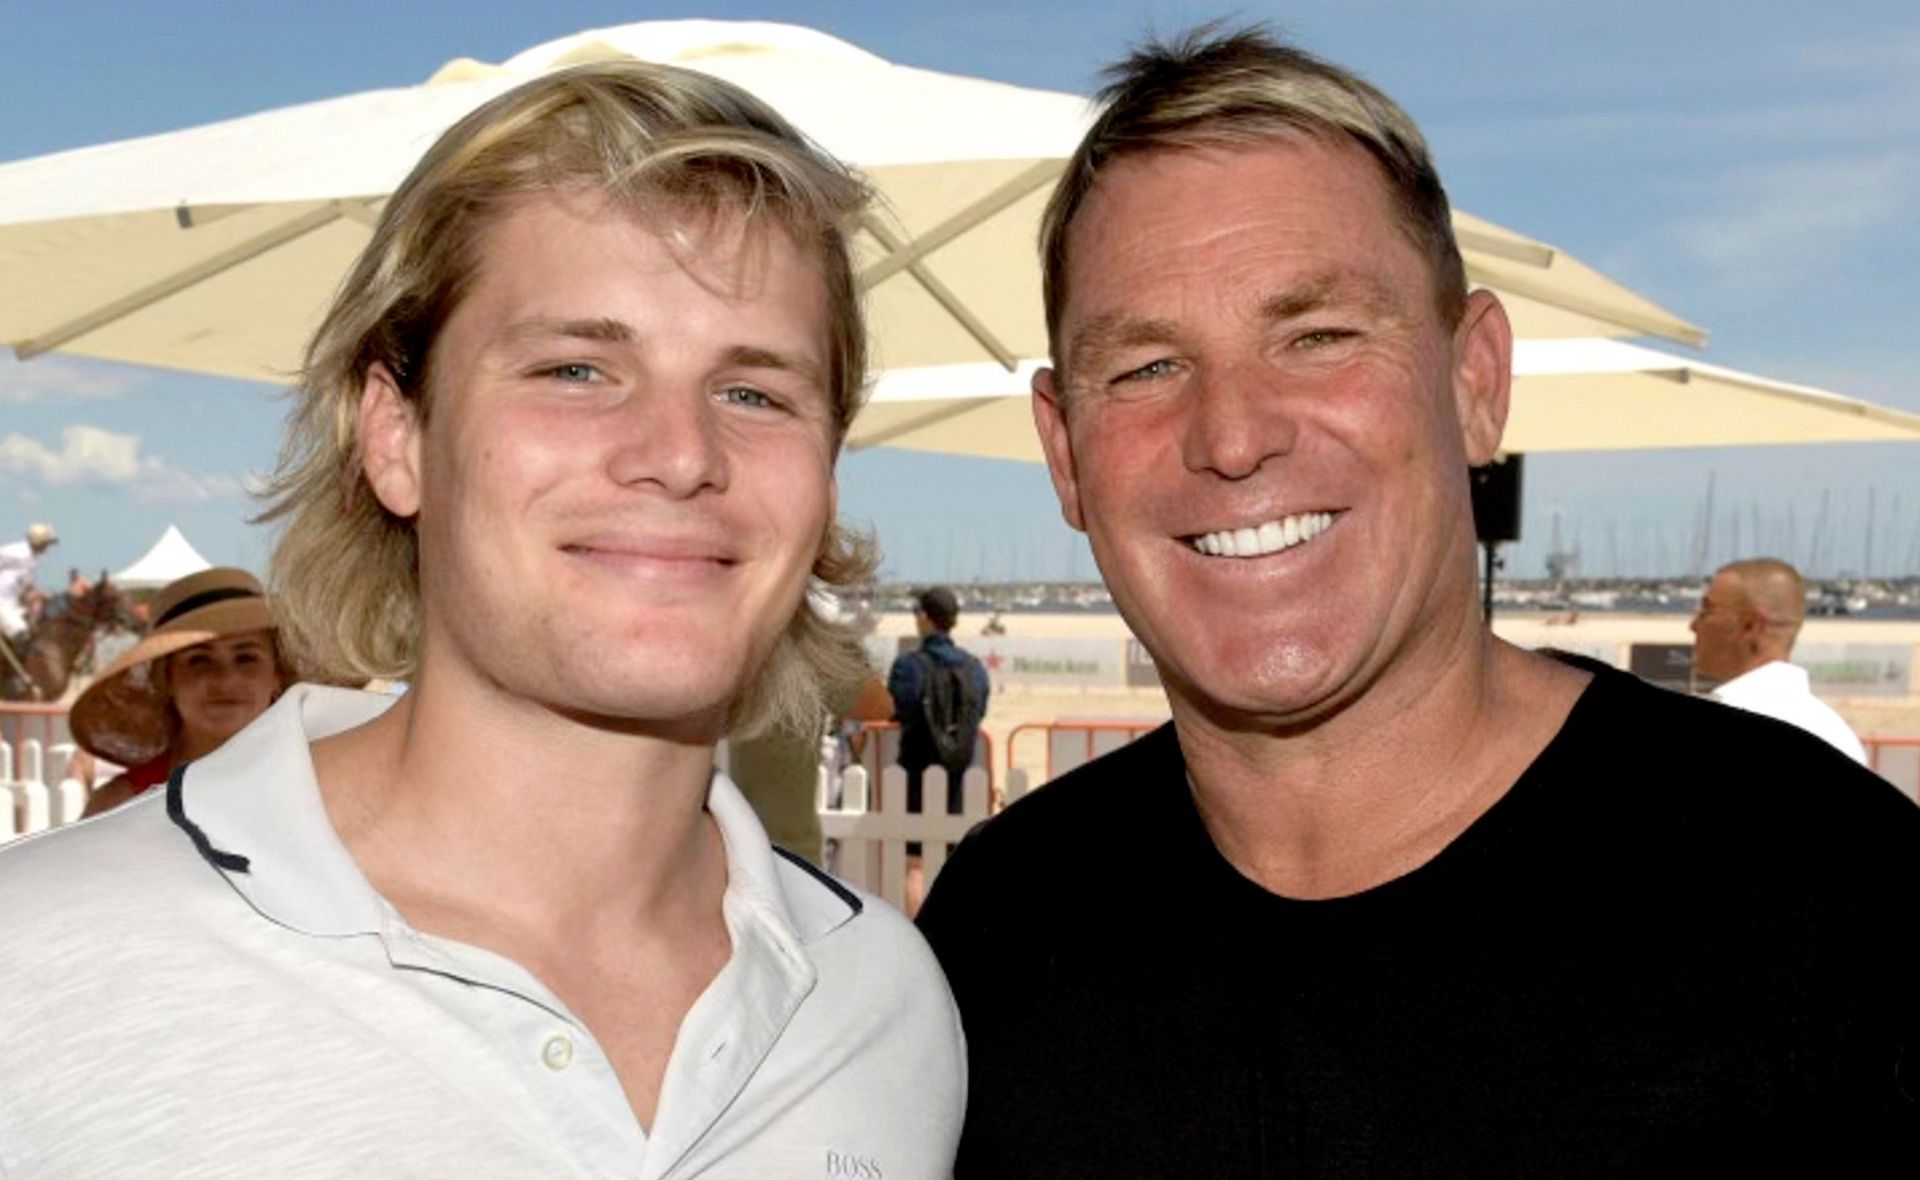 Jackson Warne opens up about dealing with his grief after Shane Warne’s passing